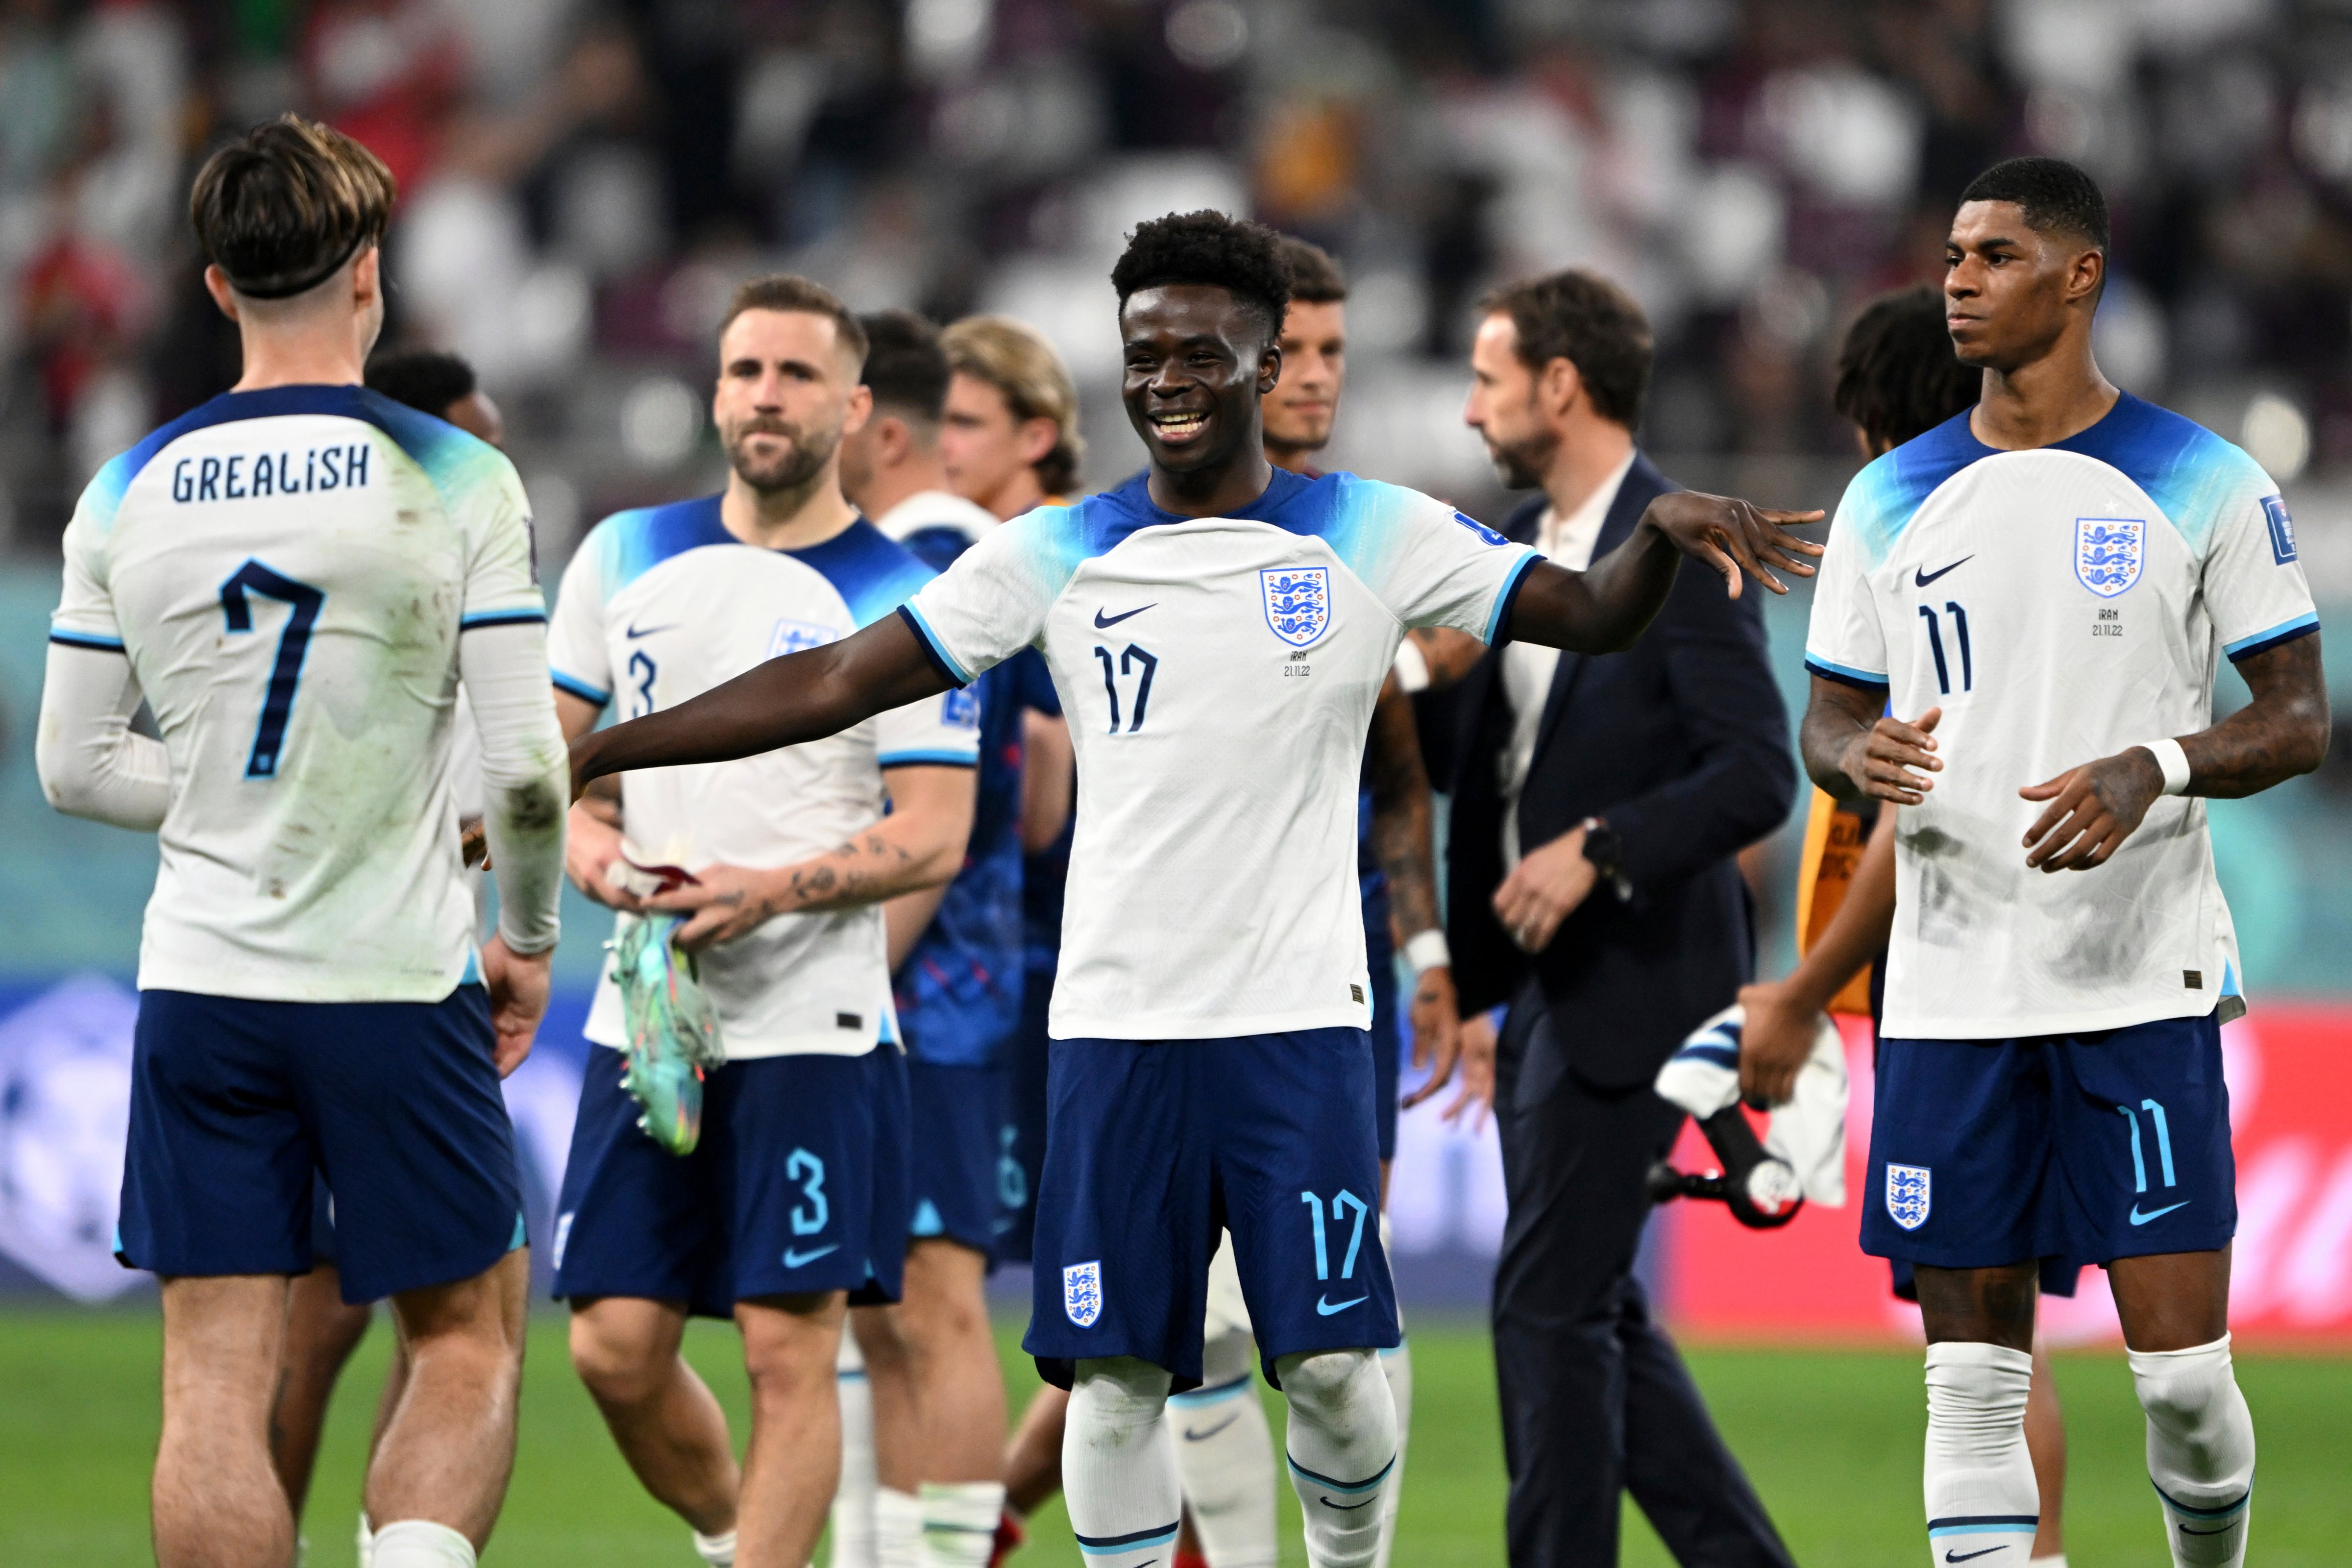 England's Bukayo Saka cheered after the final whistle after scoring two of the Three Lions' six goals against Iran.  Coach Gareth Southgate walks in the background at the Khalifa International Stadium in Qatar, November 21, 2022. (Robert Michael—picture-alliance/dpa/AP)